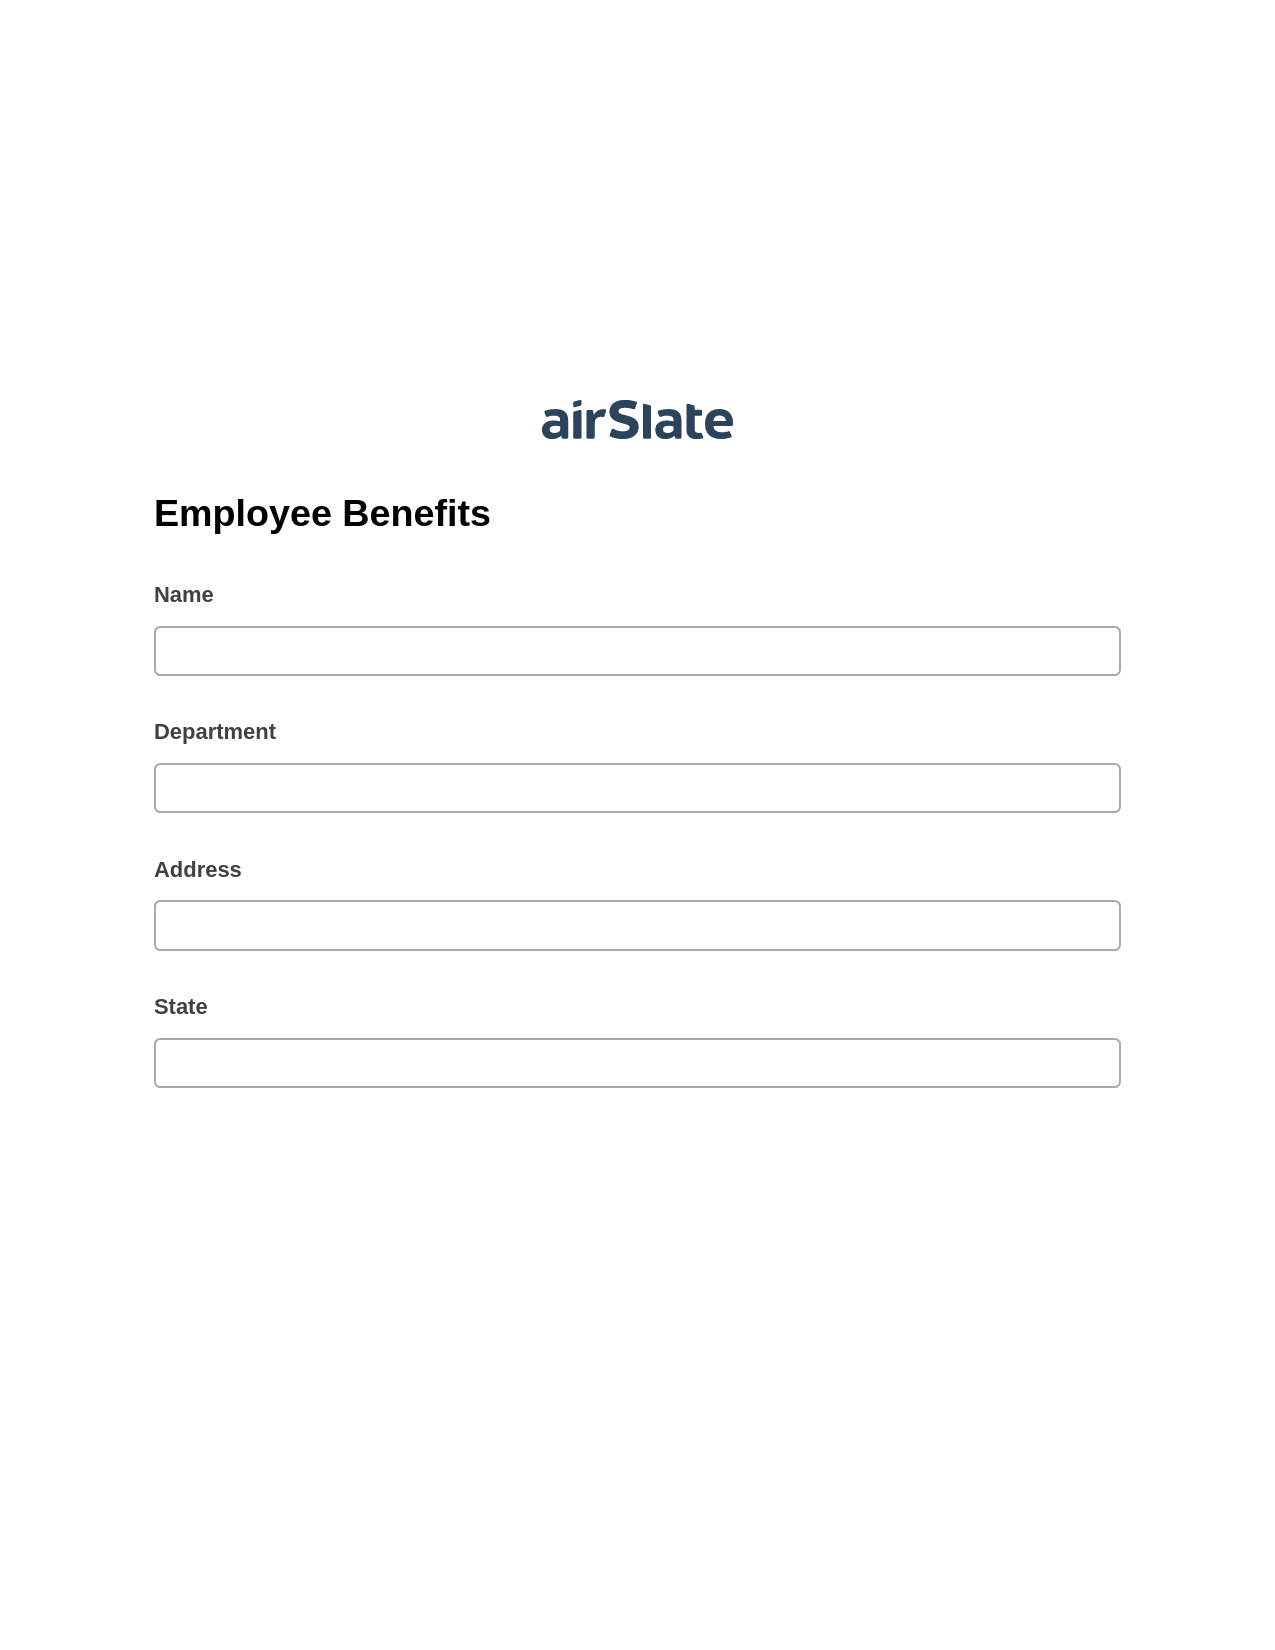 Employee Benefits Pre-fill from CSV File Bot, Create NetSuite Records Bot, Text Message Notification Postfinish Bot